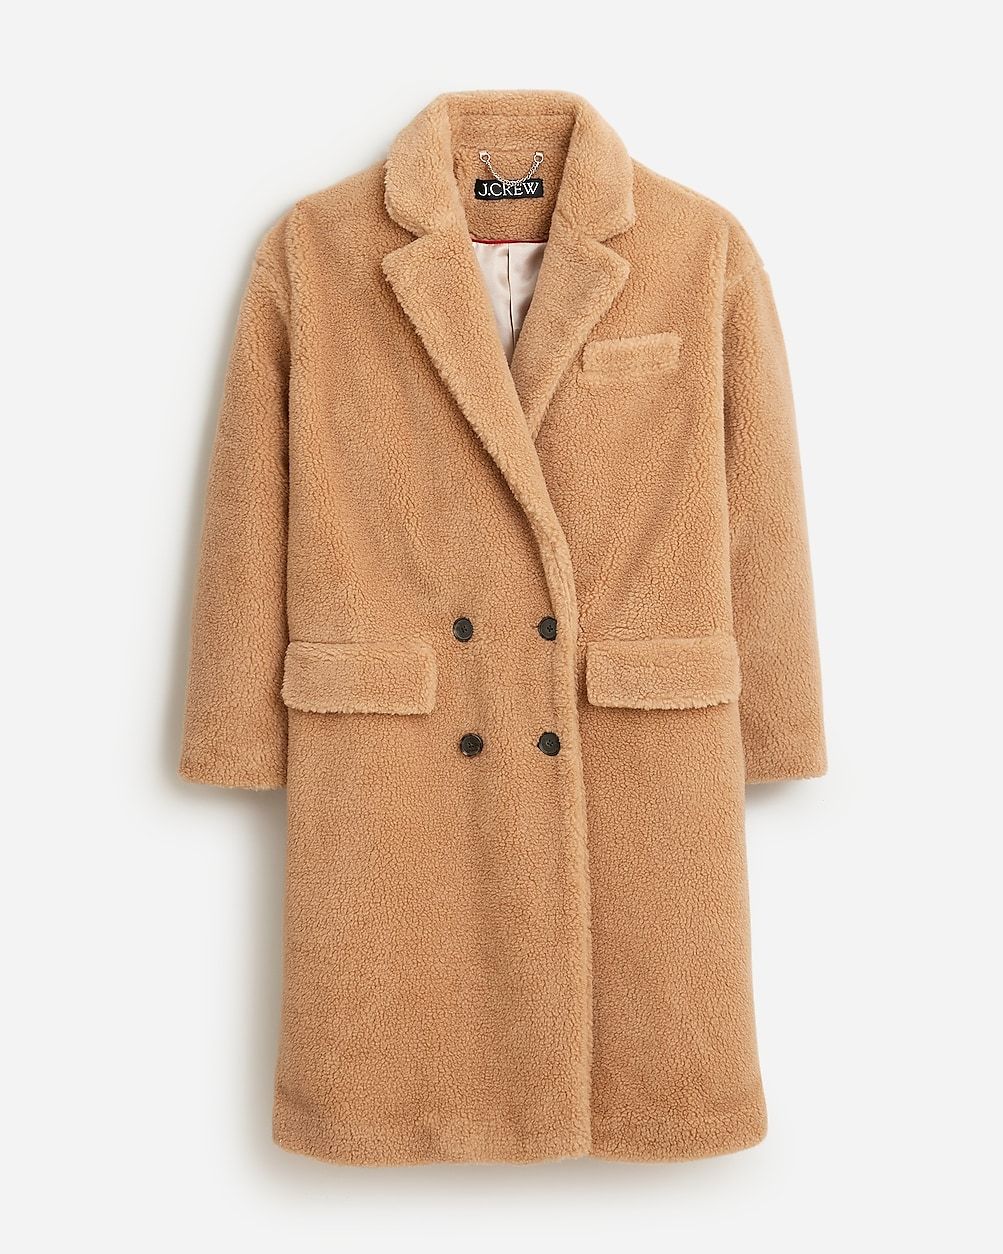 Relaxed topcoat in sherpa blend | J.Crew US